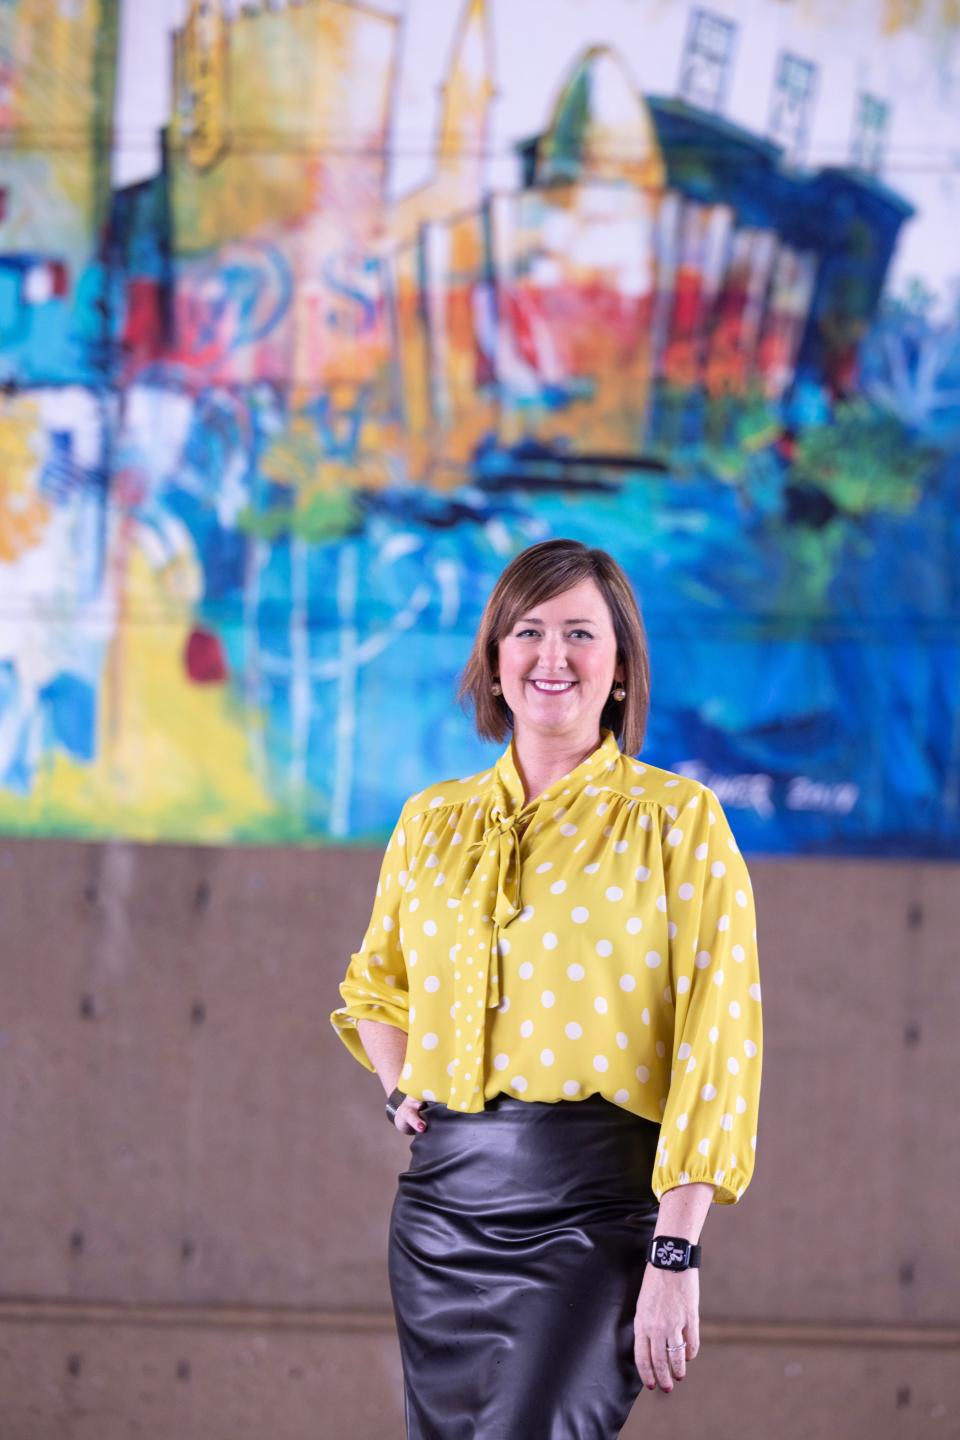 Maureen Ater has been named the new CEO of ArtsinStark, a nonprofit that advocates and provides funding for the arts community.